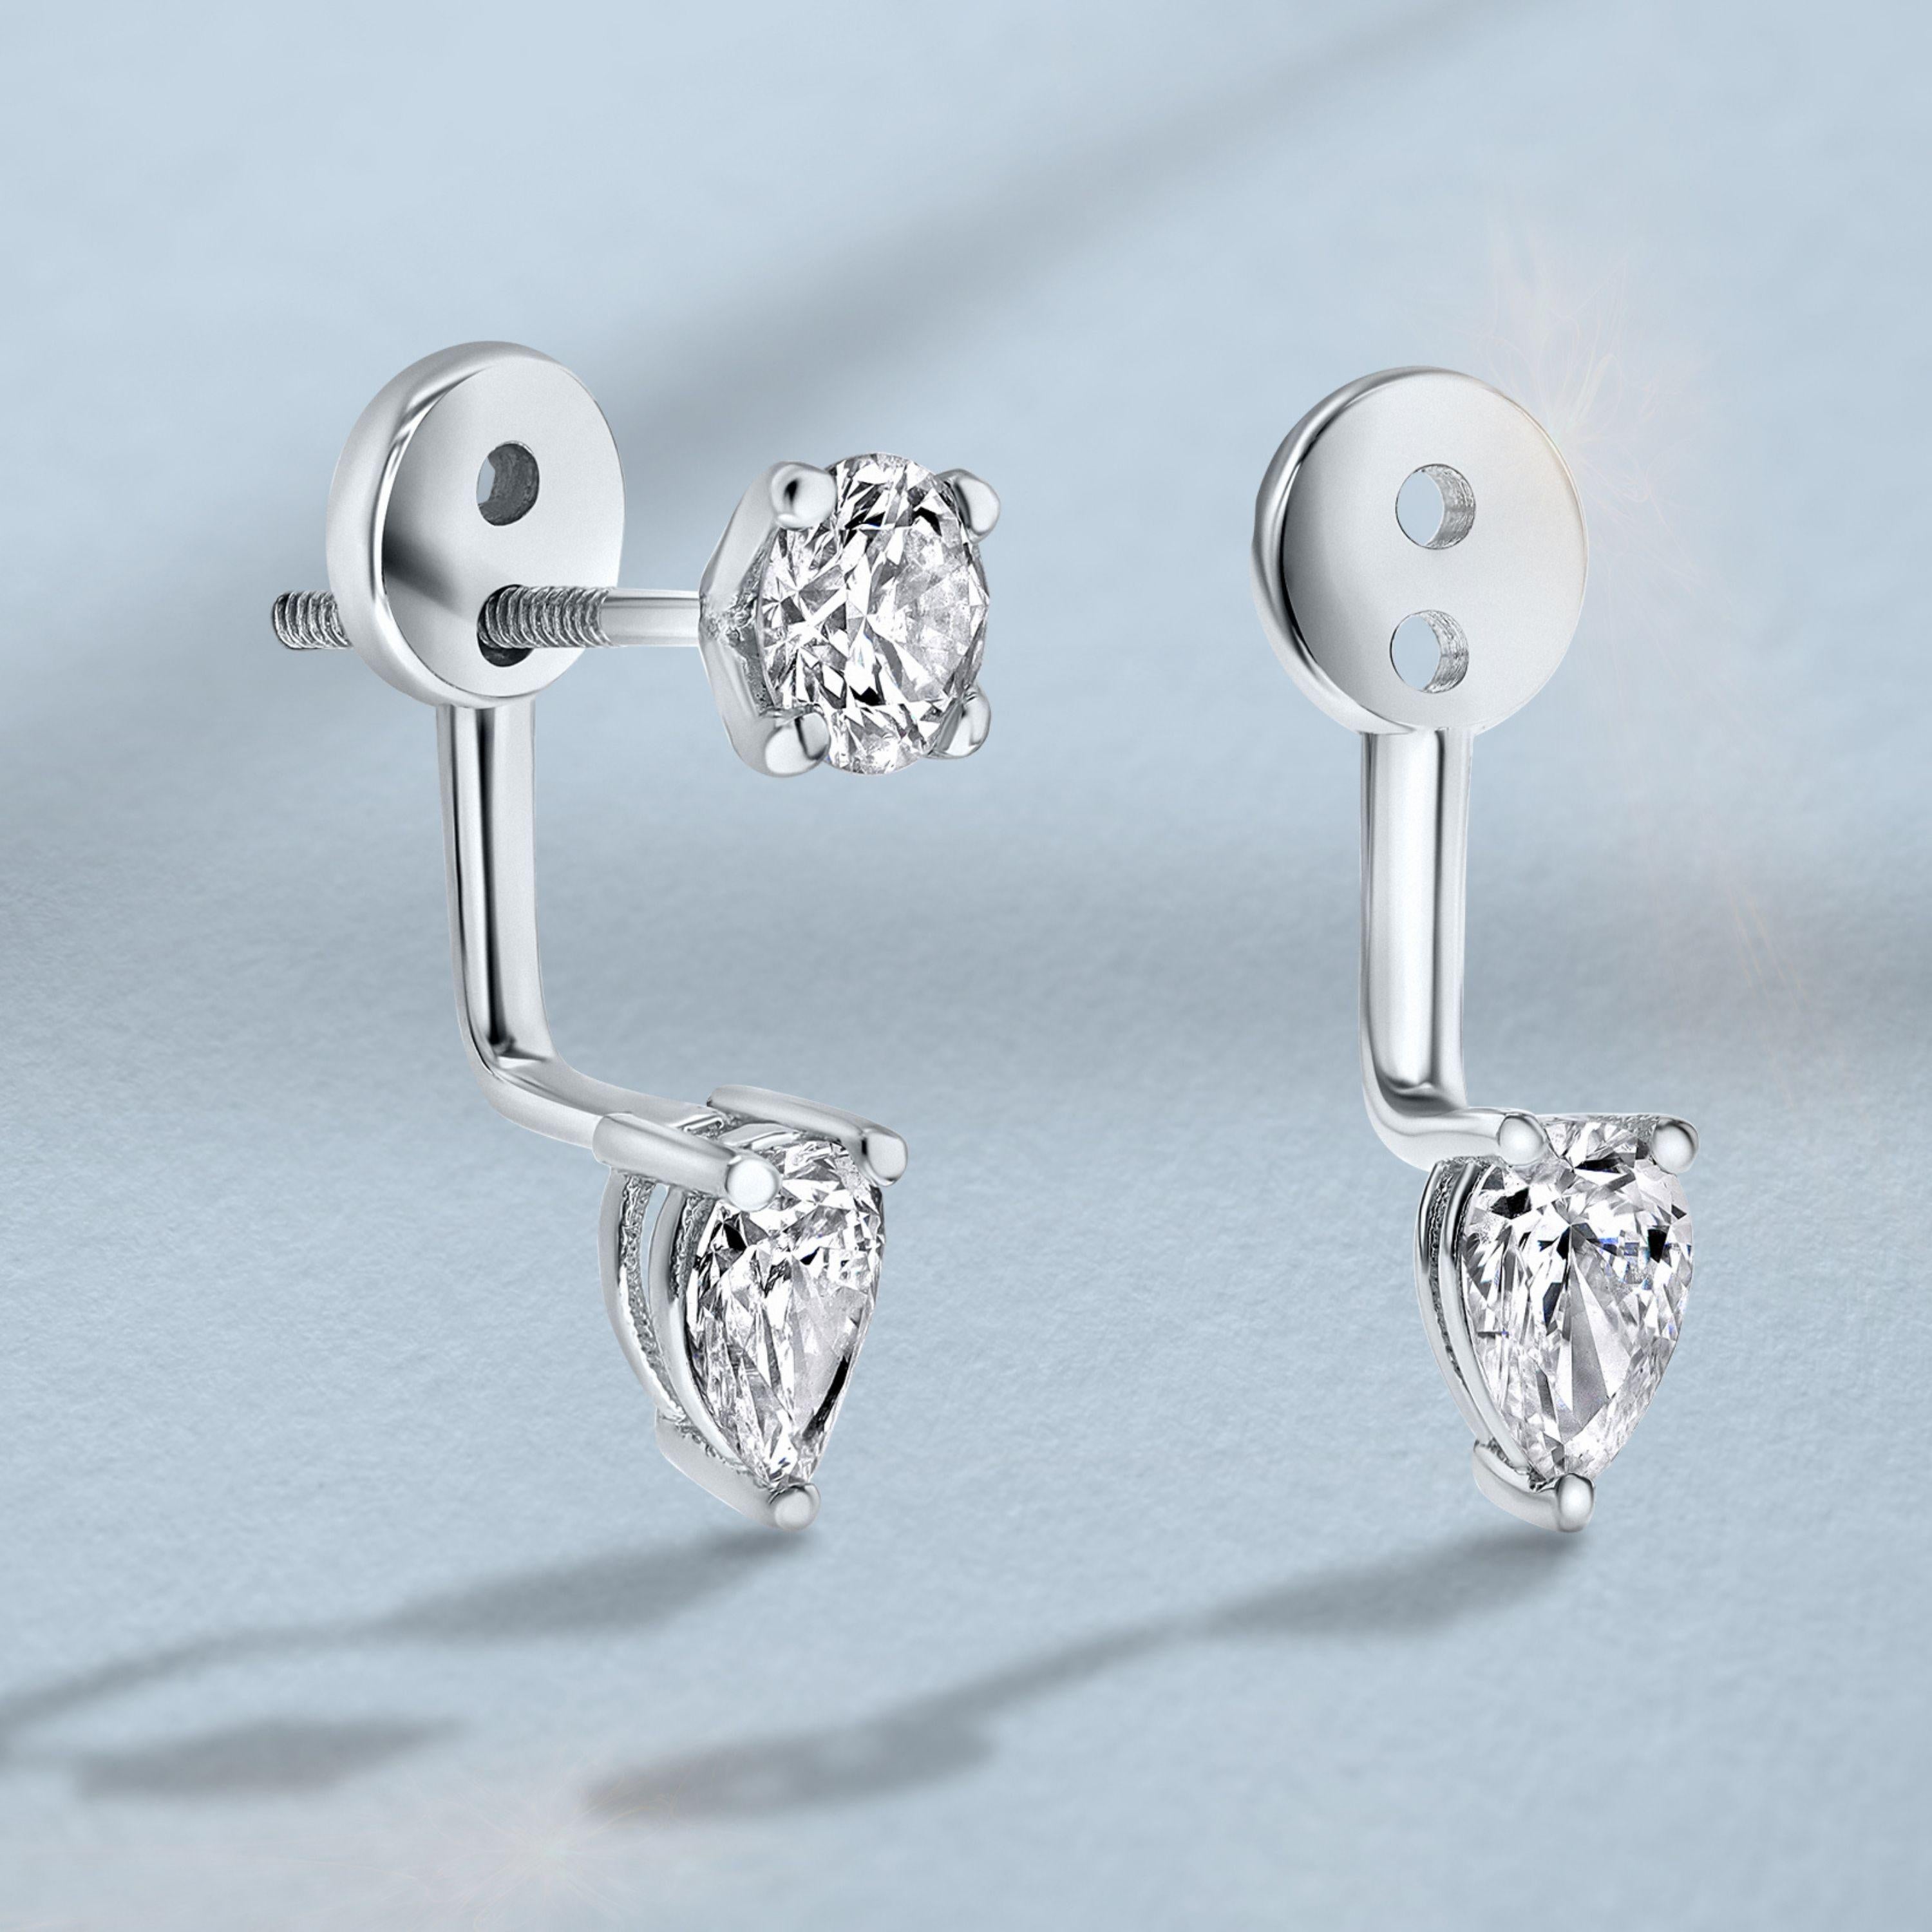 0.32 Carat Pear Shaped Diamond Ear Jackets in 14K White Gold - Shlomit Rogel

Upgrade your classic diamond studs with these 14k white gold brackets set with a pear shaped diamond, which give the appearance of a diamond floating below the